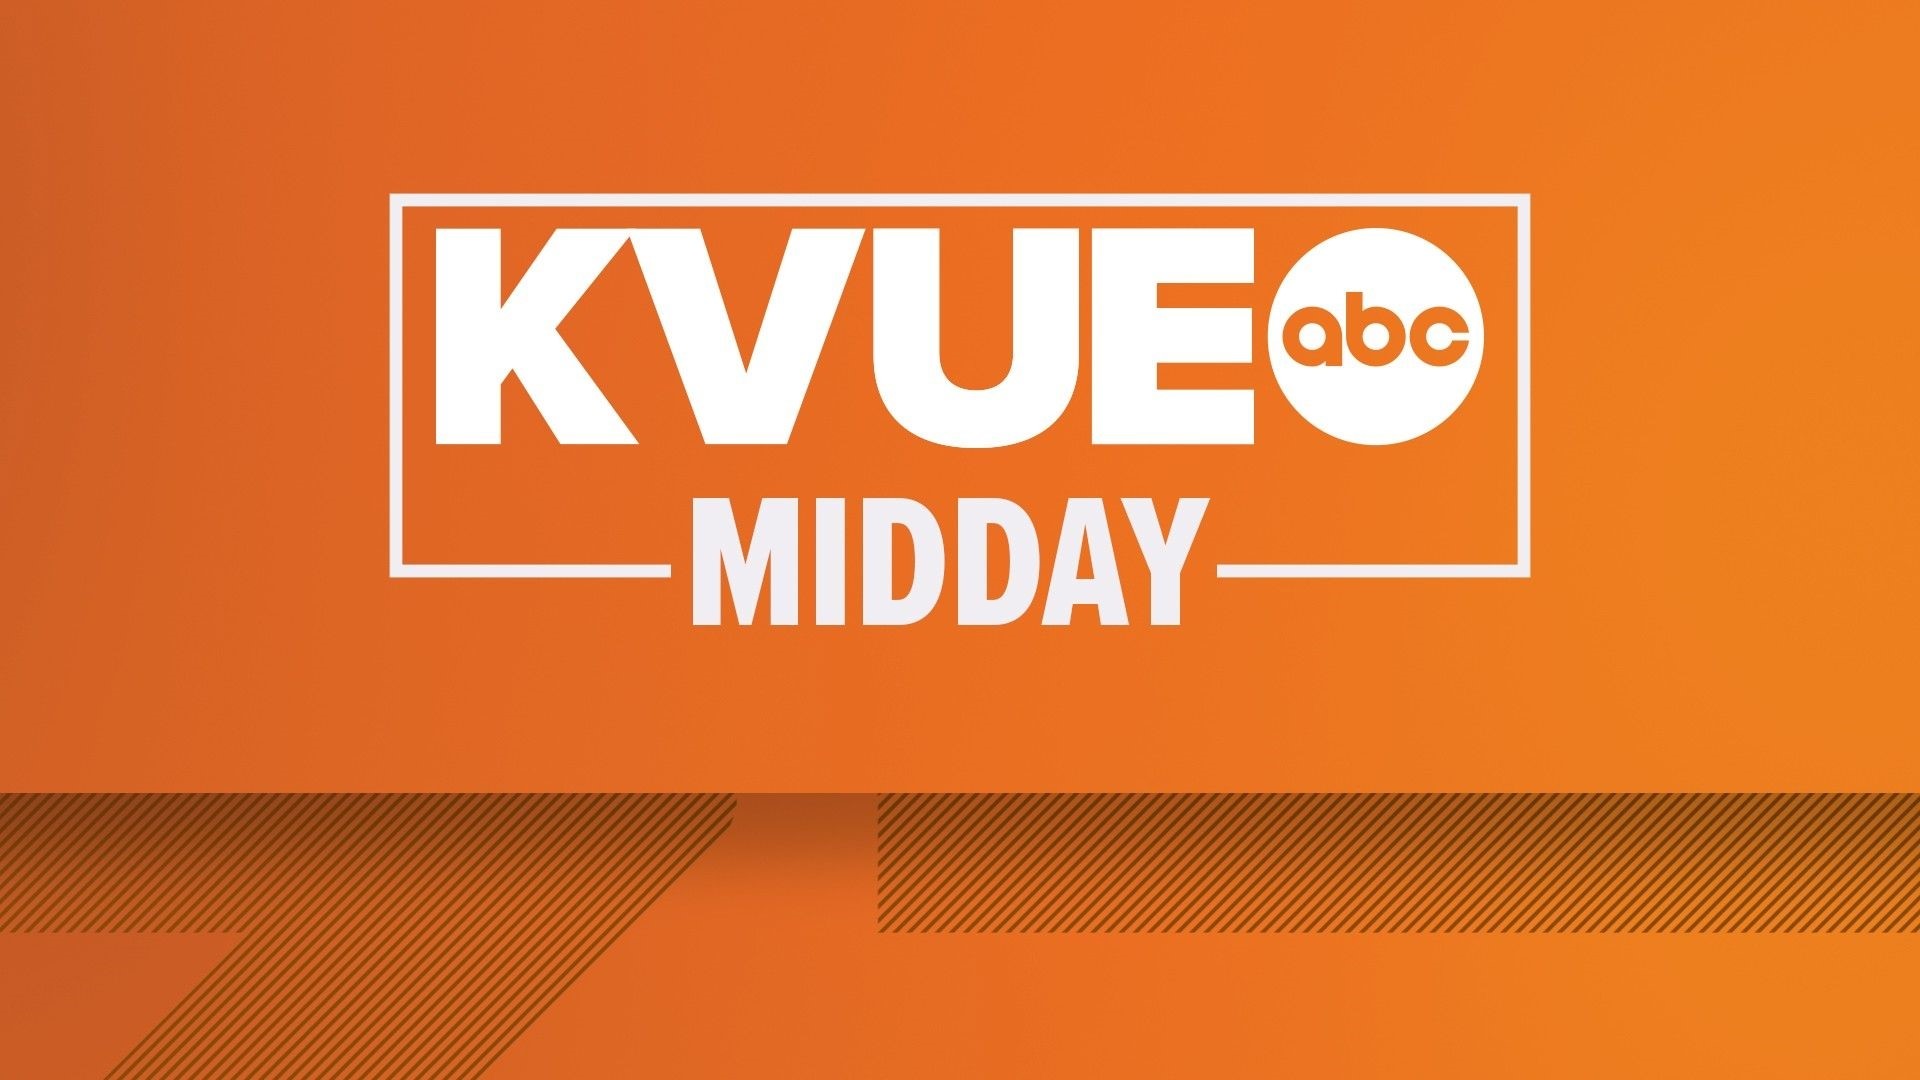 The latest local, regional and national news events of the morning are presented by the KVUE News team, along with updated sports, weather and traffic.